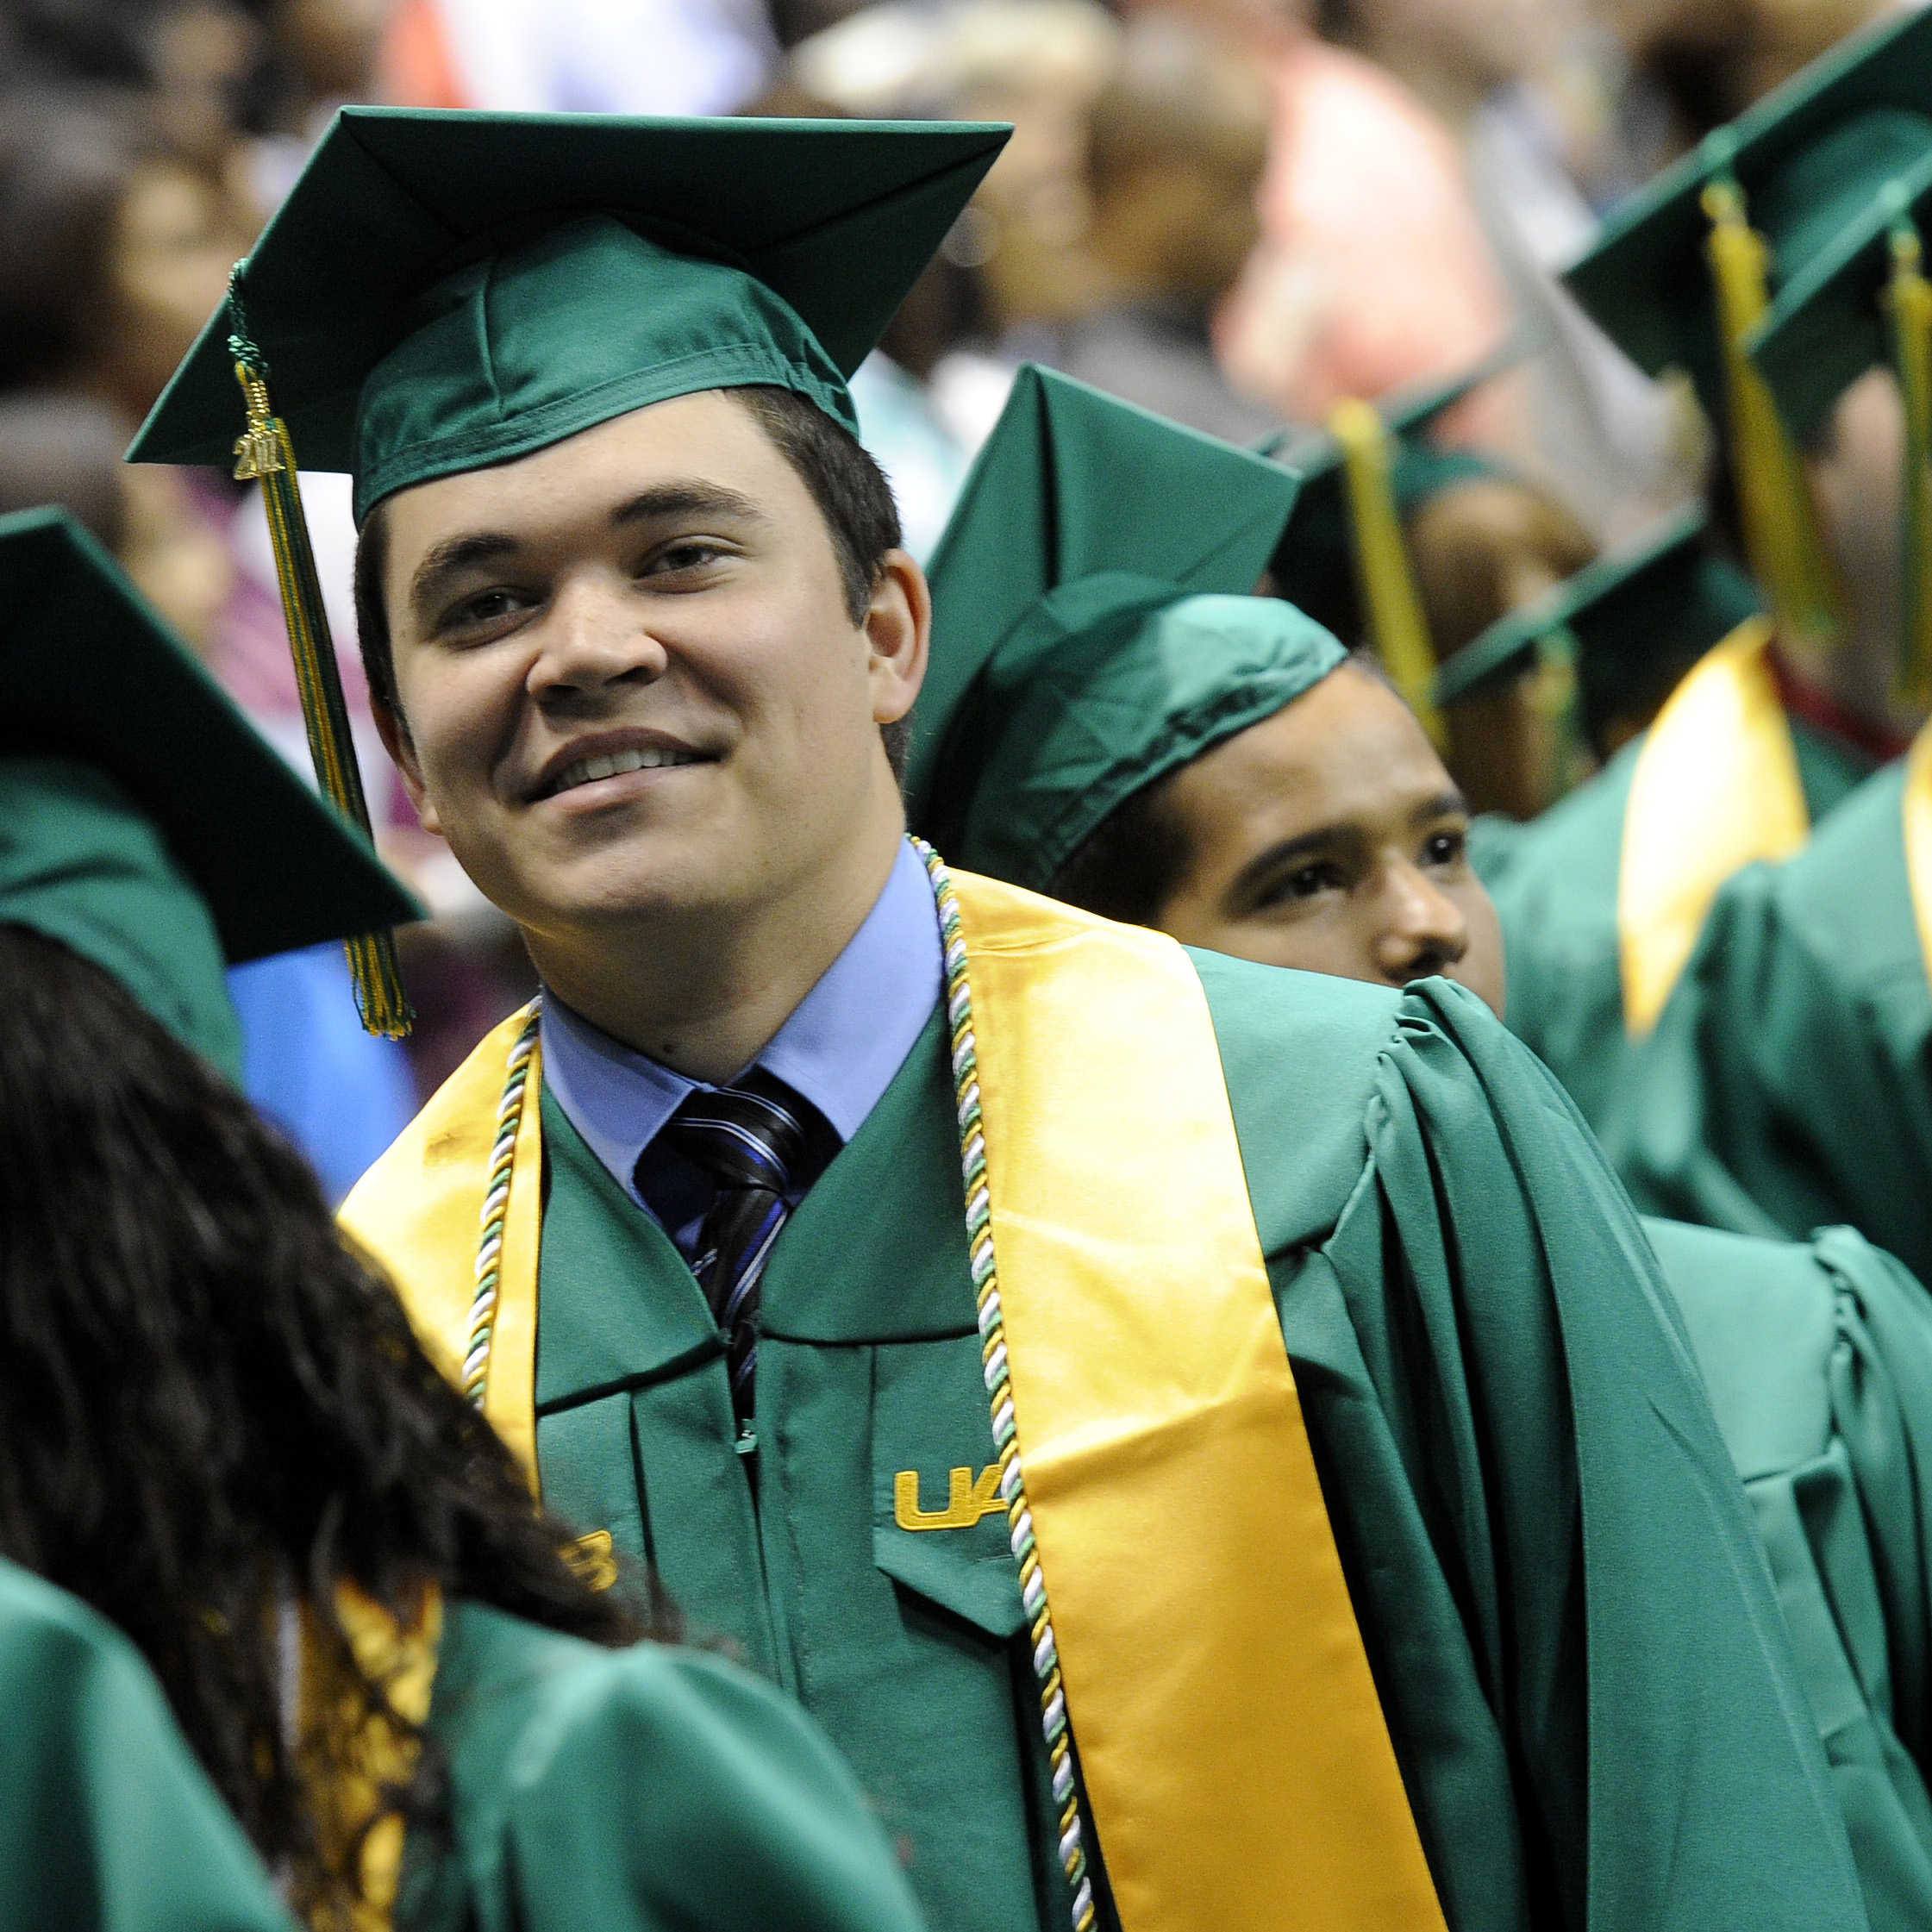 UAB Student wearing graduation garb during May 2011 commencement